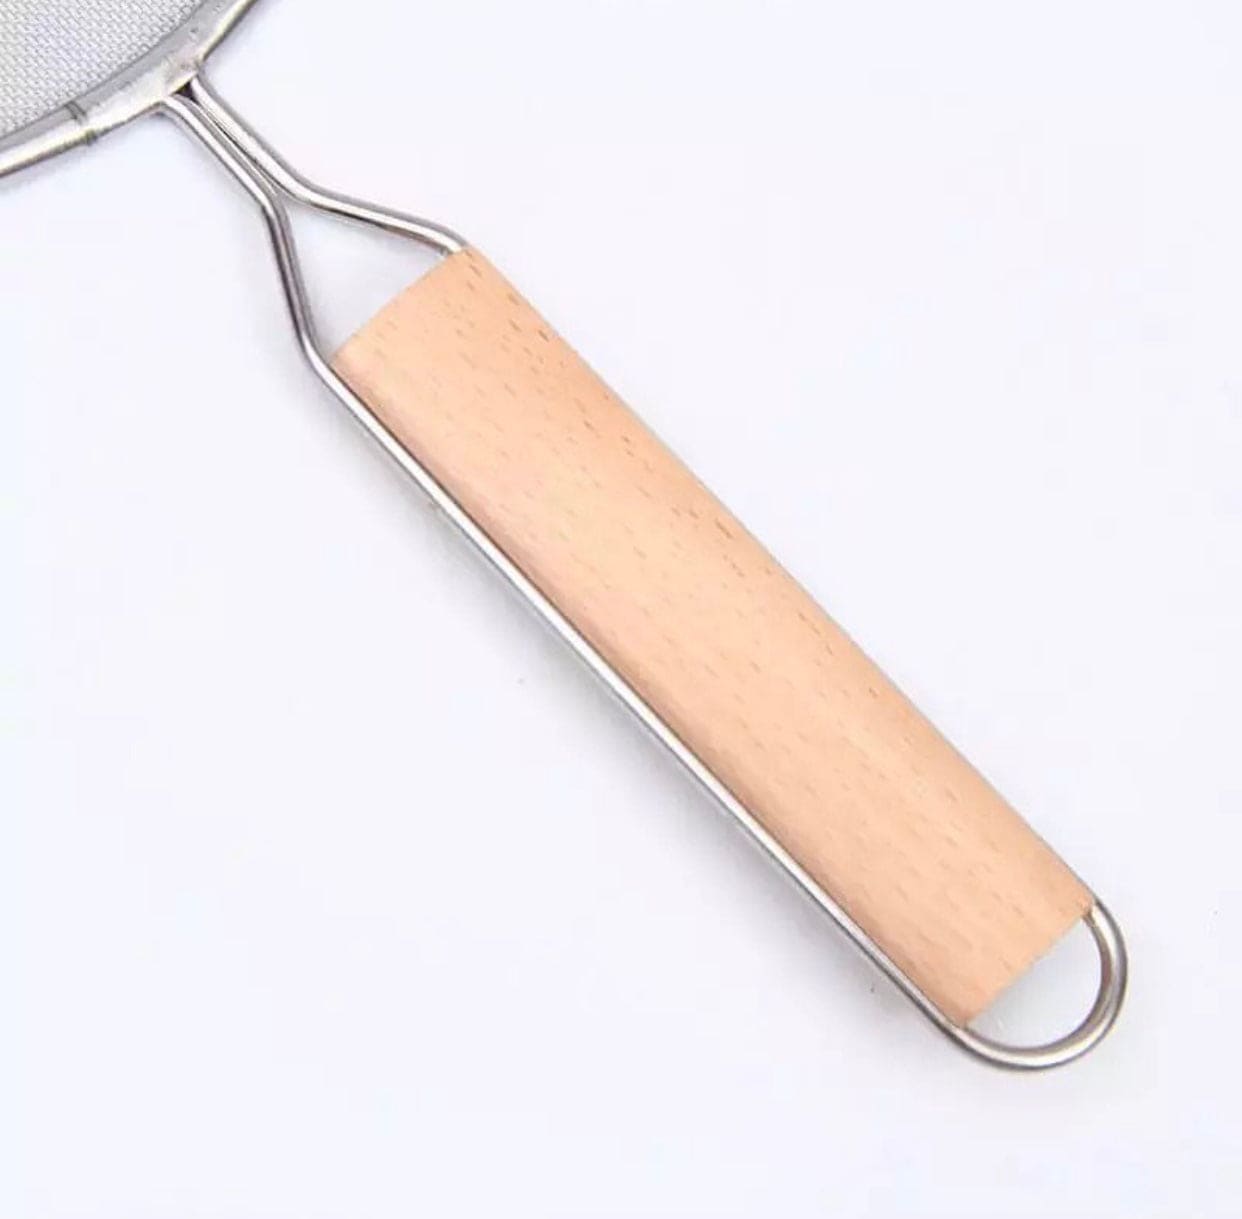 Stainless Steel Splatter with Wooden Handle, Screen For Frying Pans, Mesh Guard For Kitchen Cooking, Hot Oil Splash Splatter With Wooden Handle